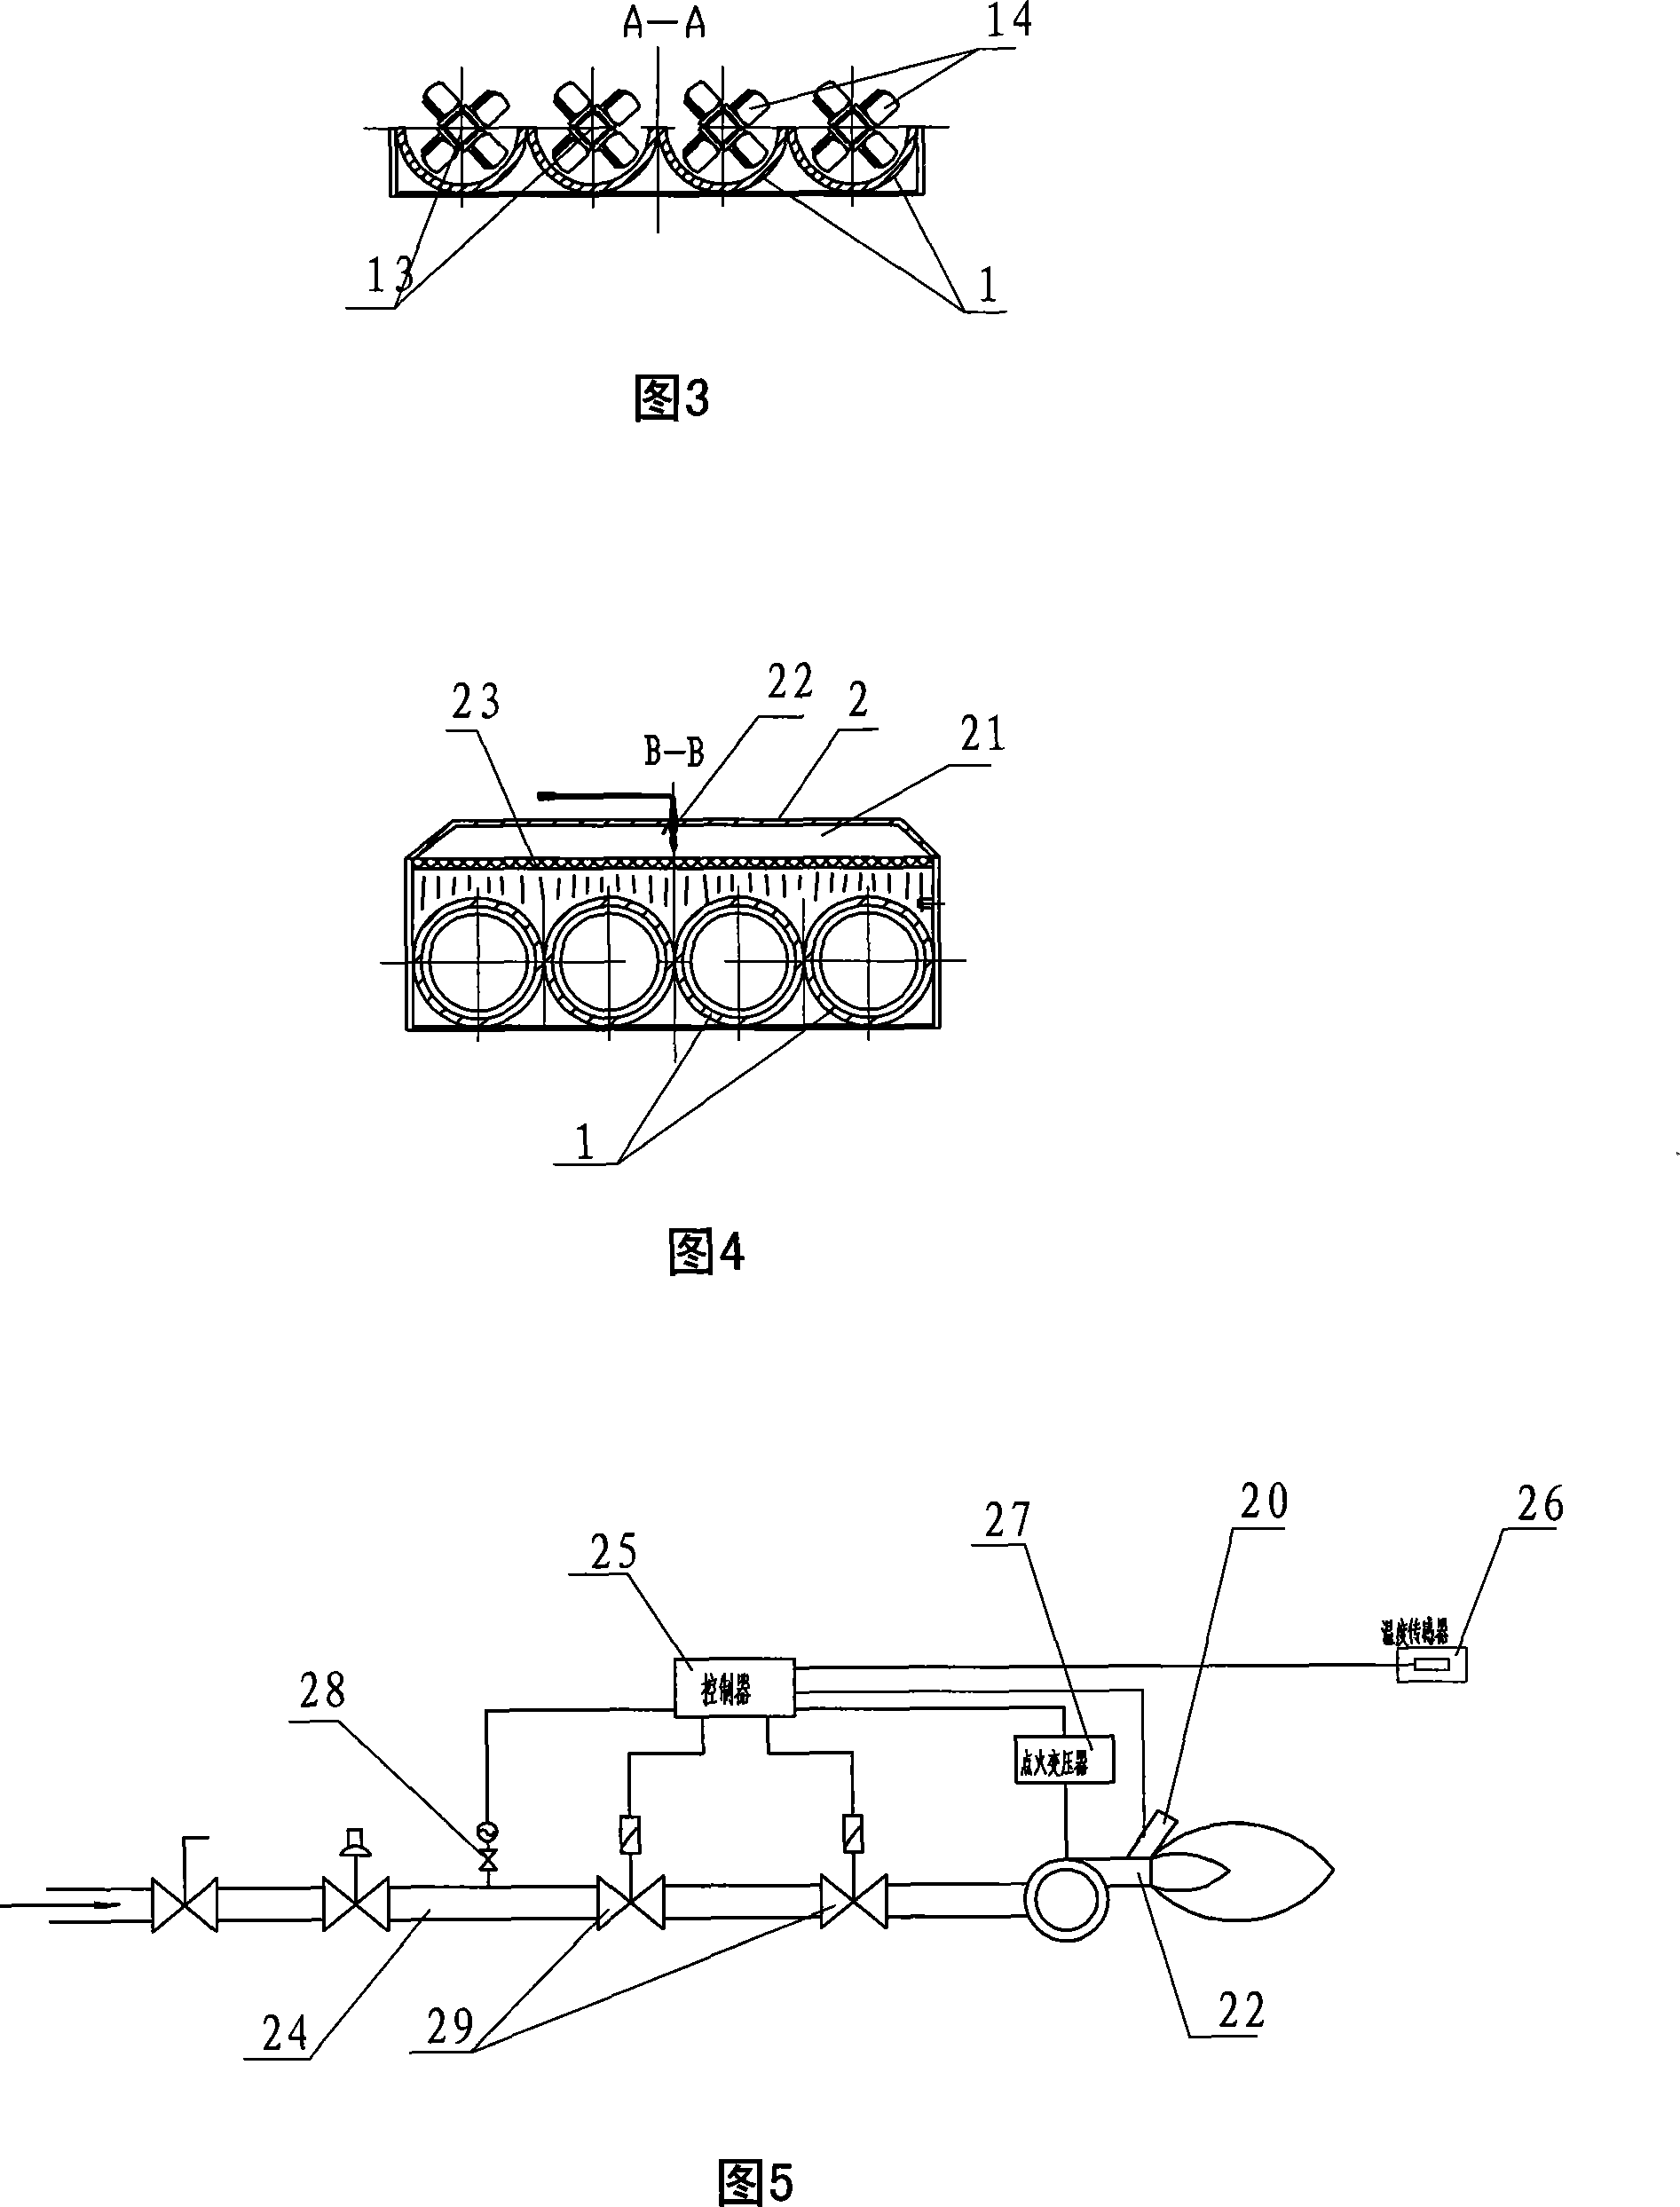 Material transferring system for spreading machine